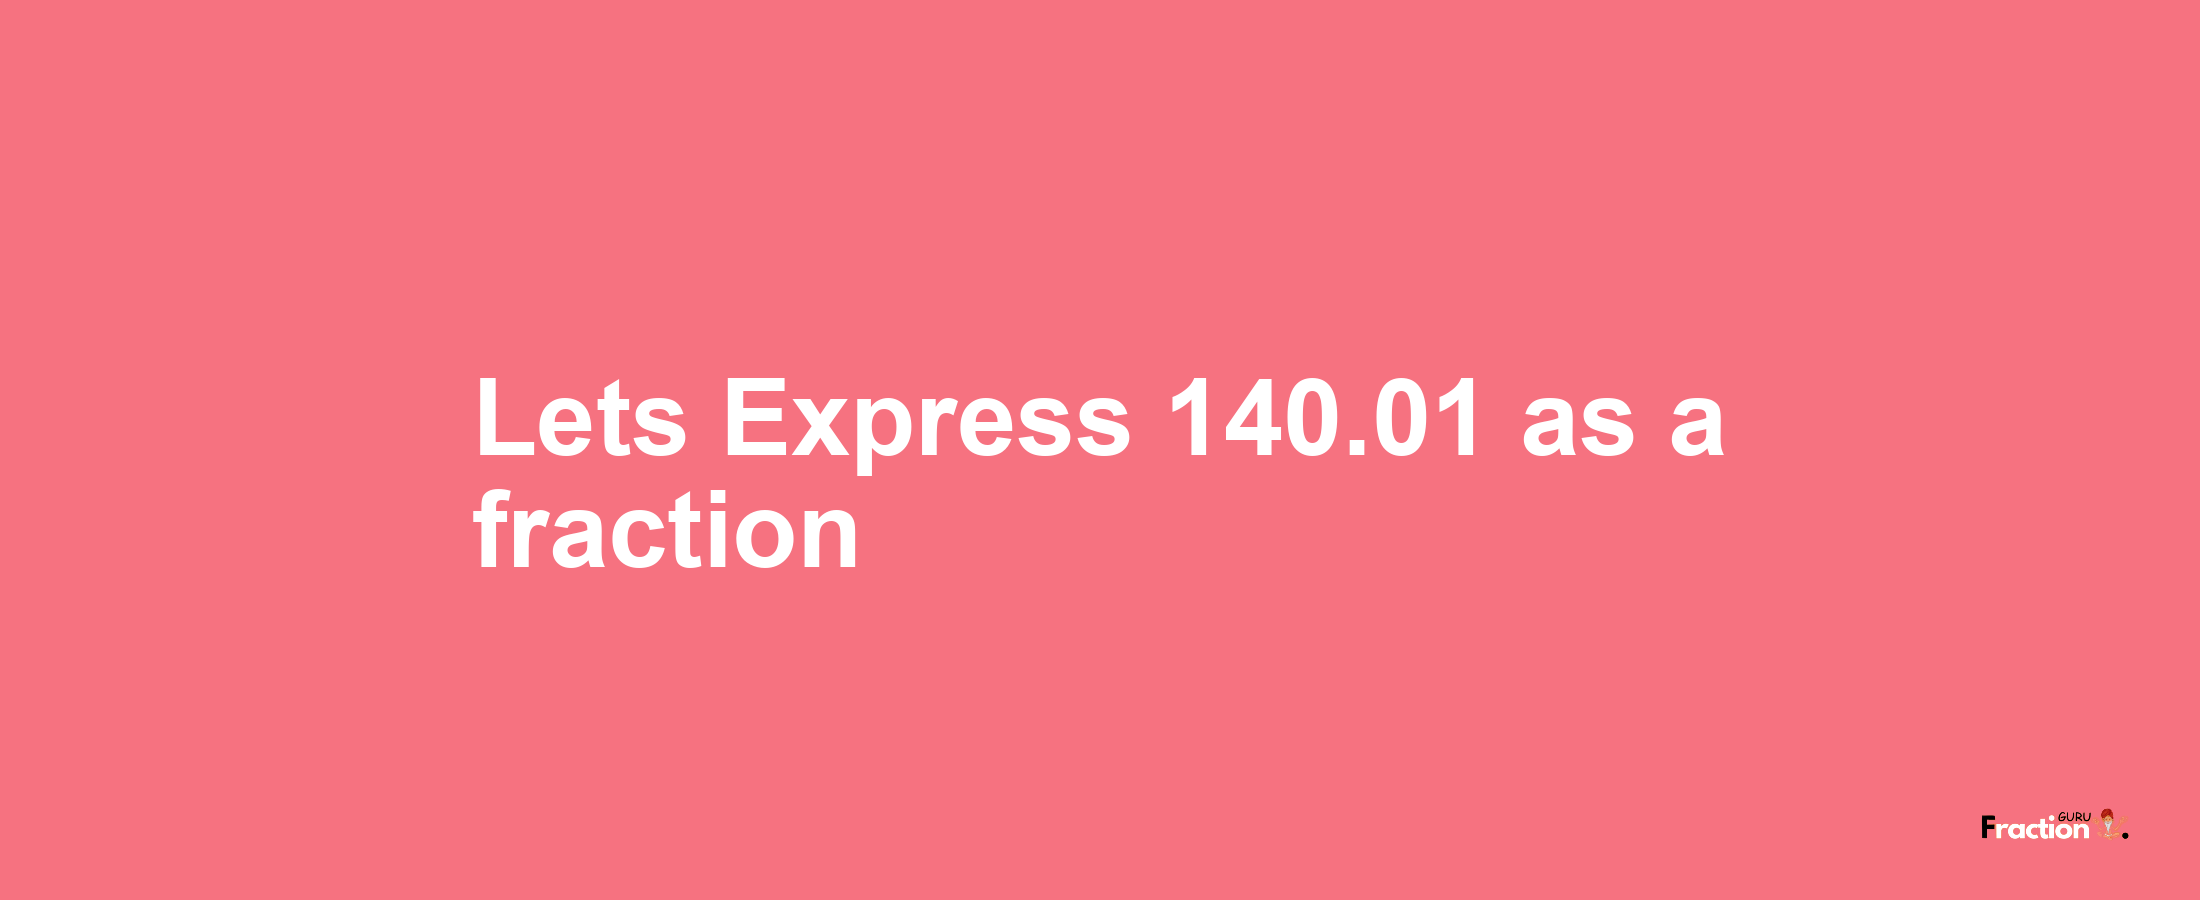 Lets Express 140.01 as afraction